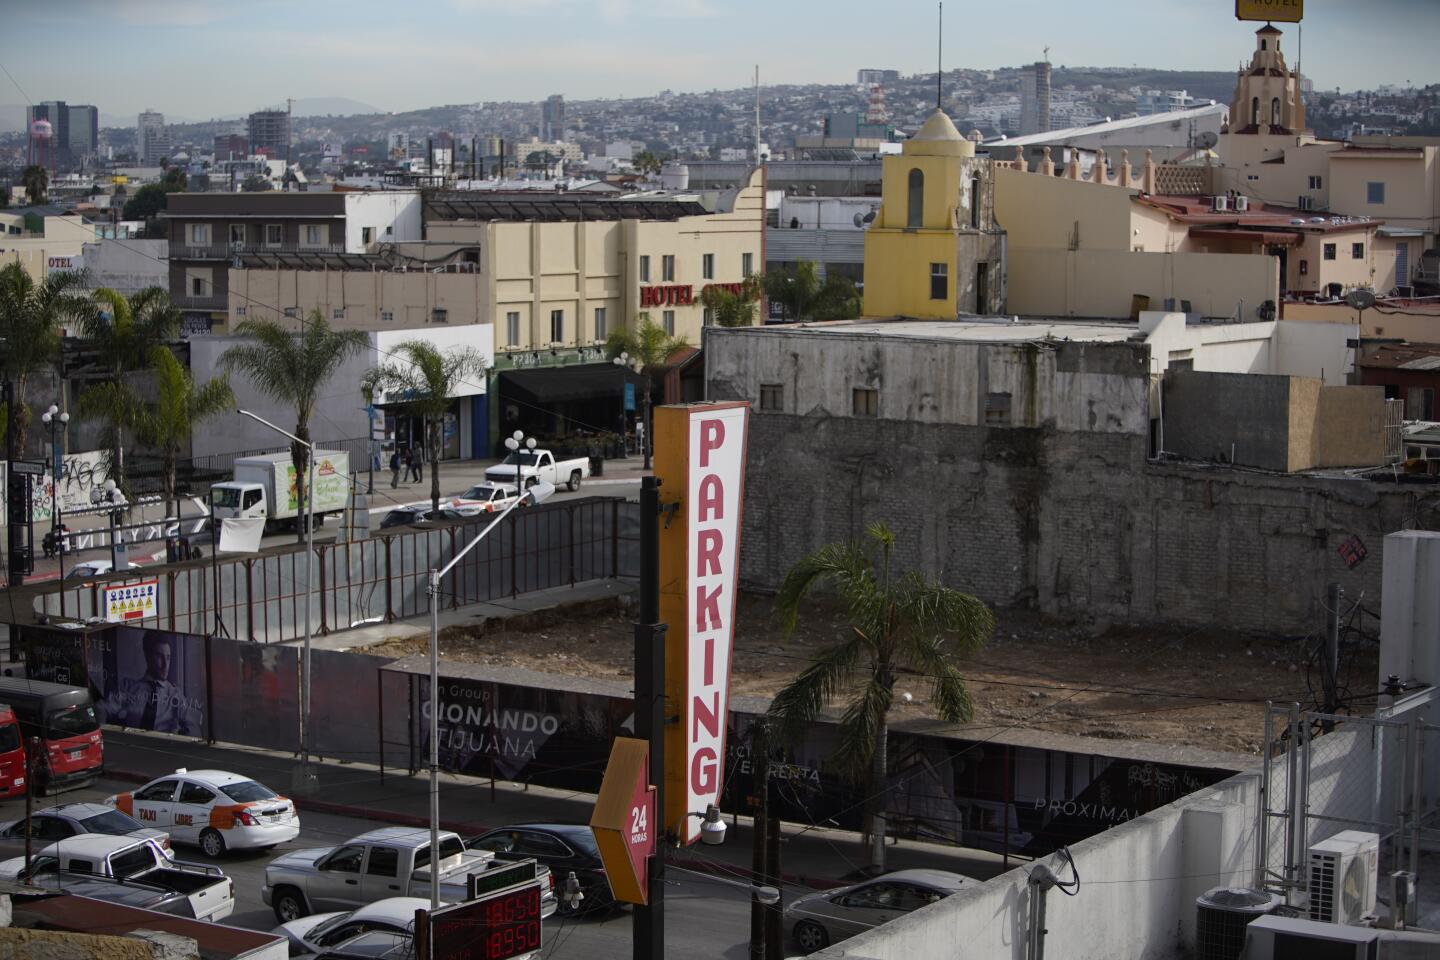 Cosmopolitan Group, Tijuana's largest builder, is constructing a wild looking 25-story mixed-use building on the city's Av. Revolucion, close to the famous Caesar's restaurant. The $40 million project looks like three offset large boxes stacked on top of each other. It will have 256 hotel rooms and around 4,000 sq ft of commercial.